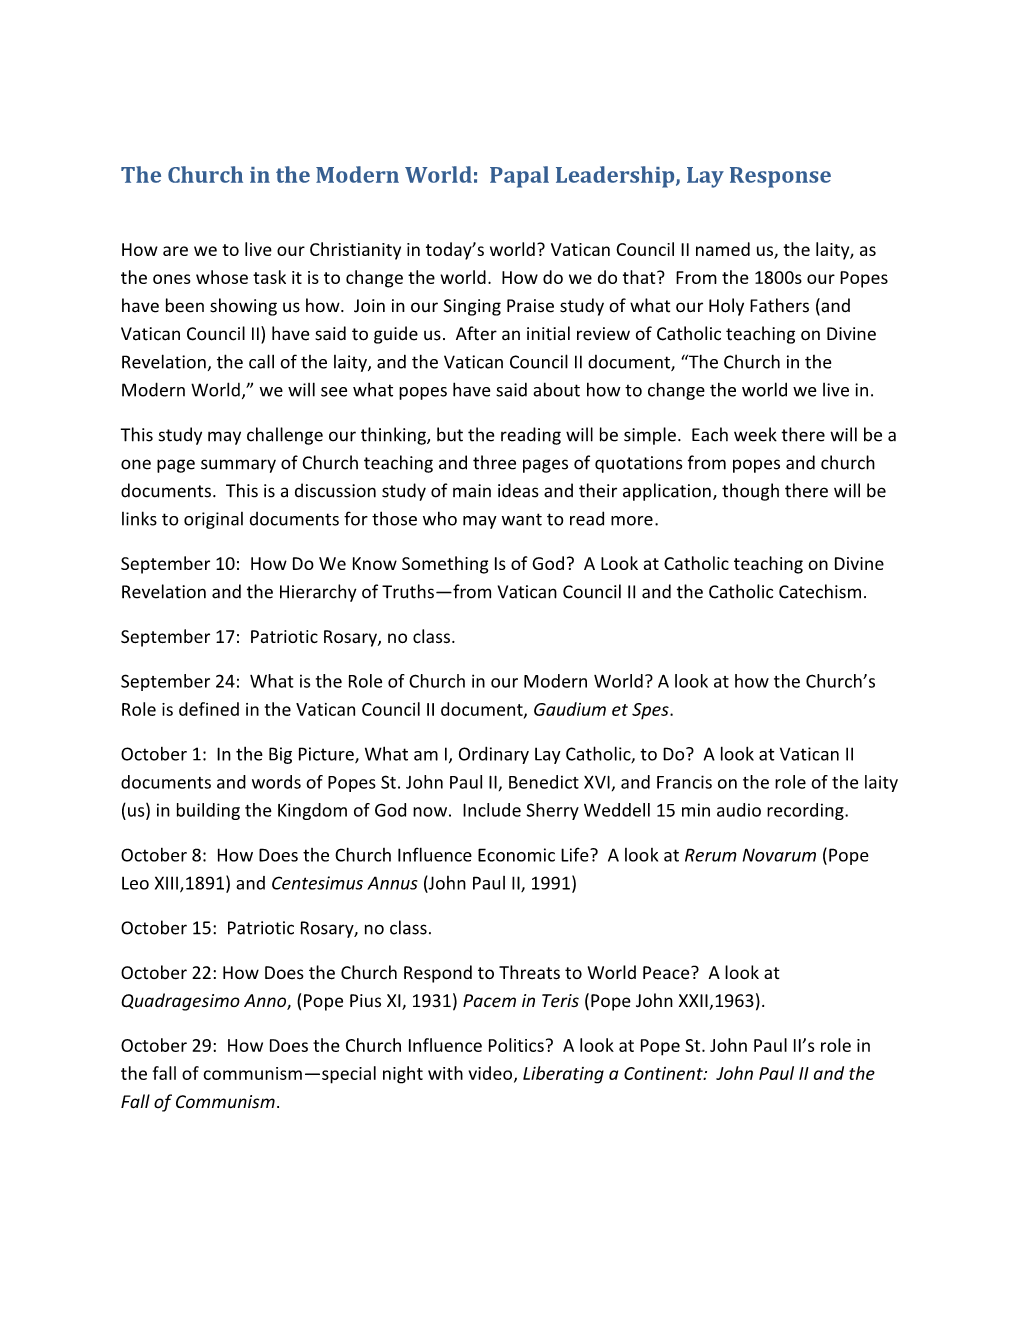 The Church in the Modern World: Papal Leadership, Lay Response